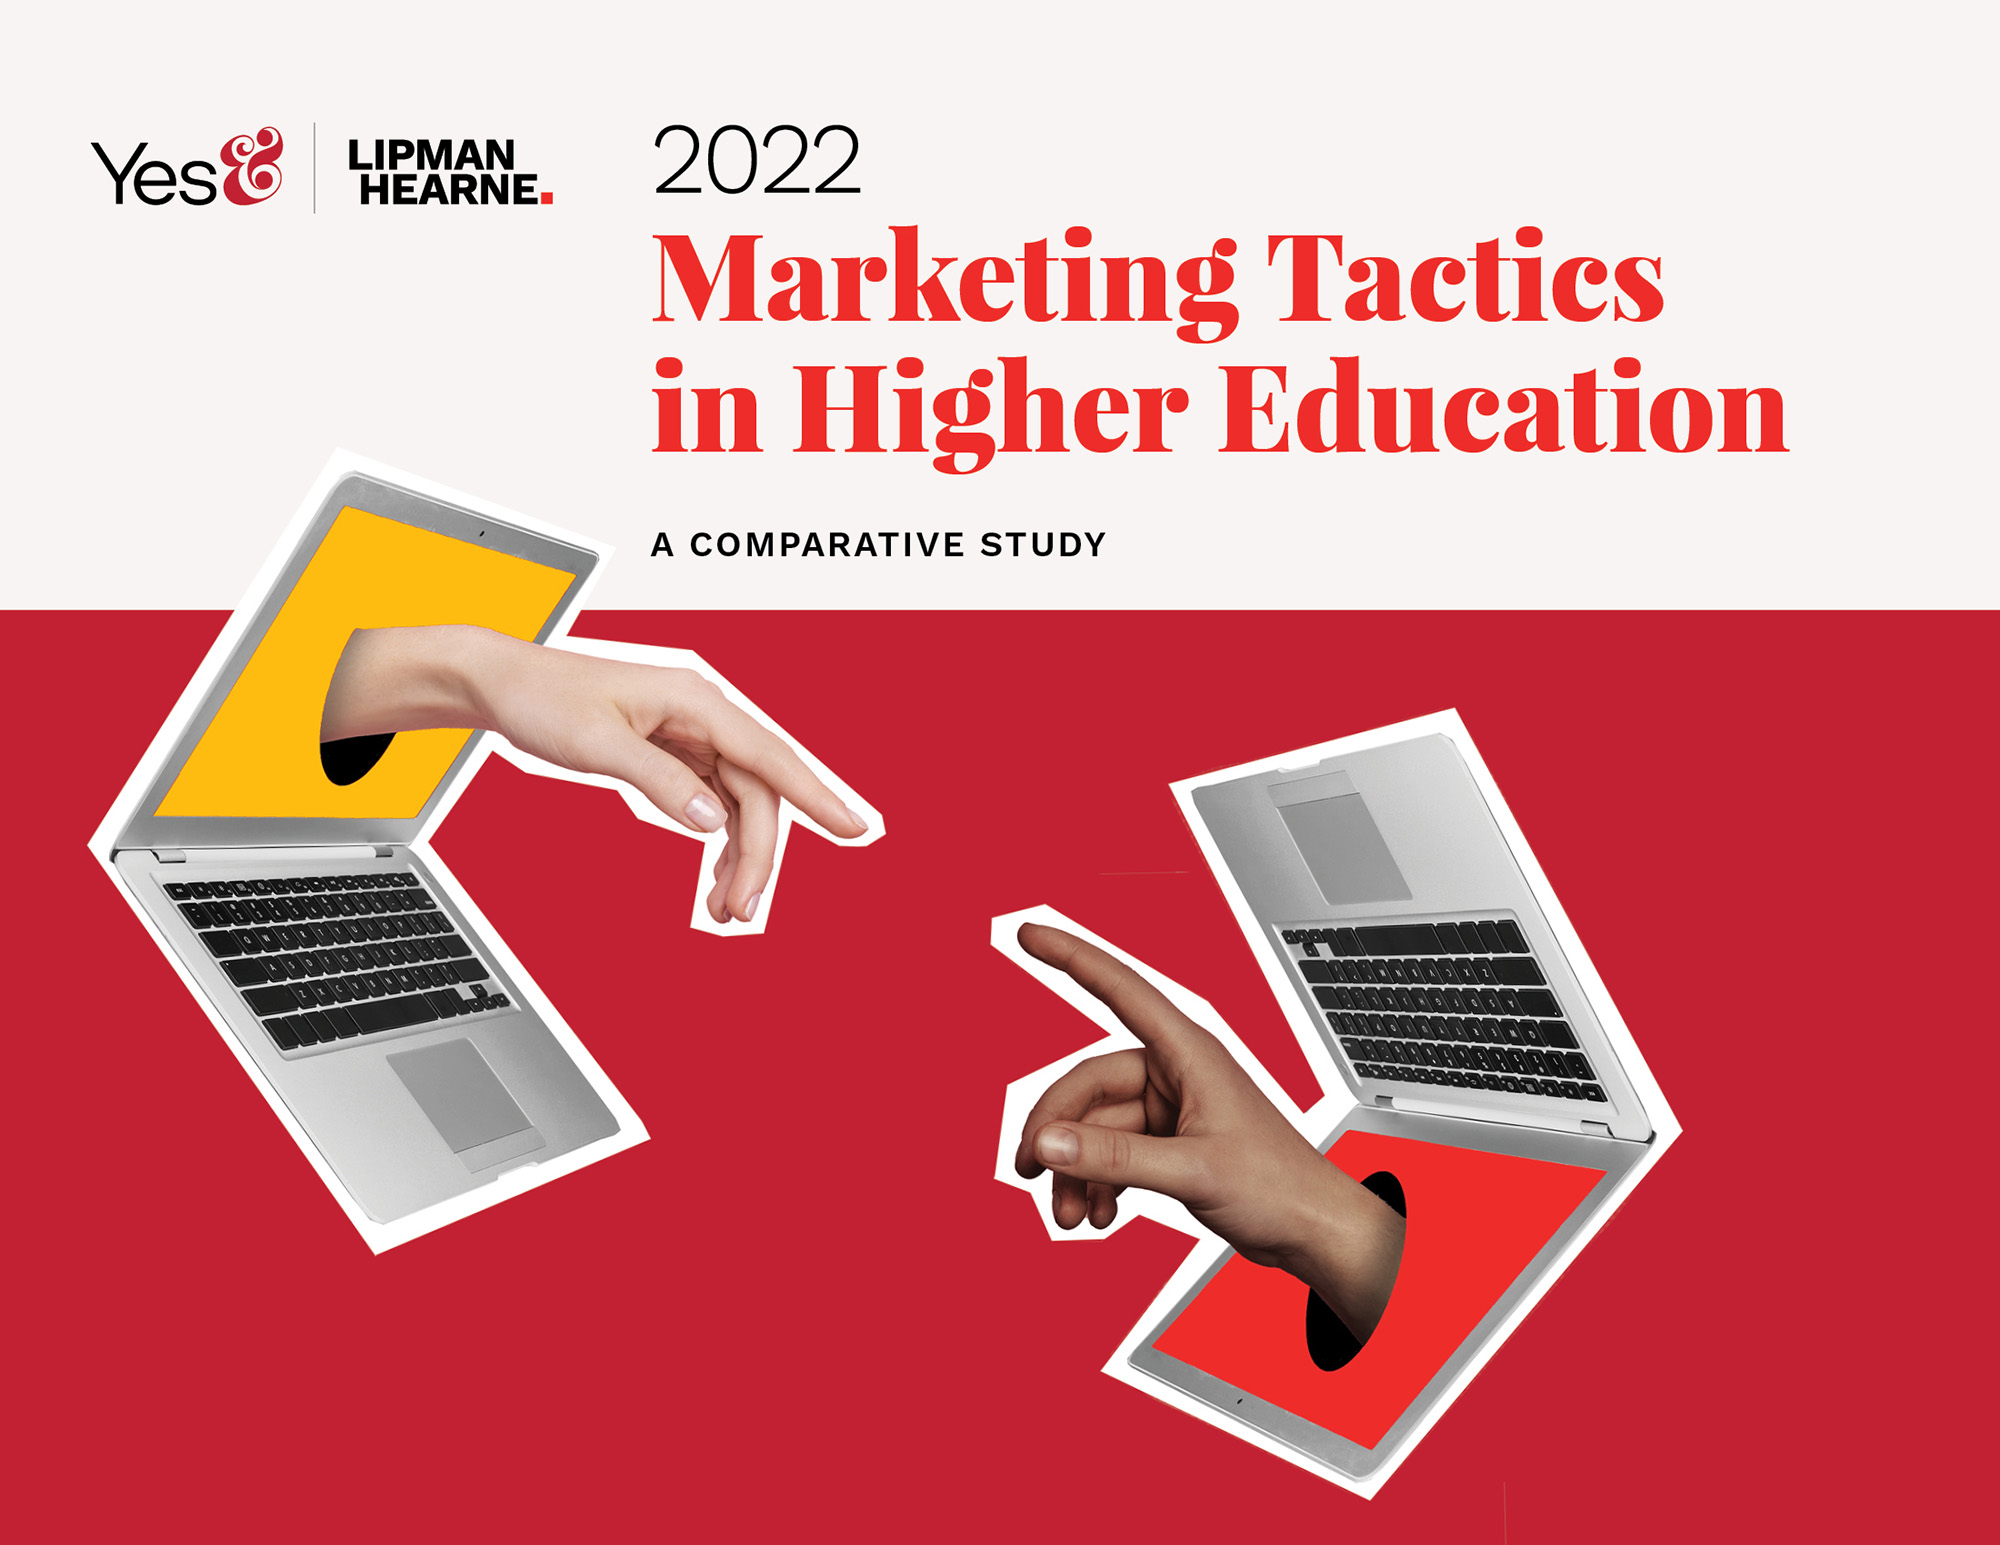 Yes and LH 2022 Marketing Tactics in Higher Education PDF cover